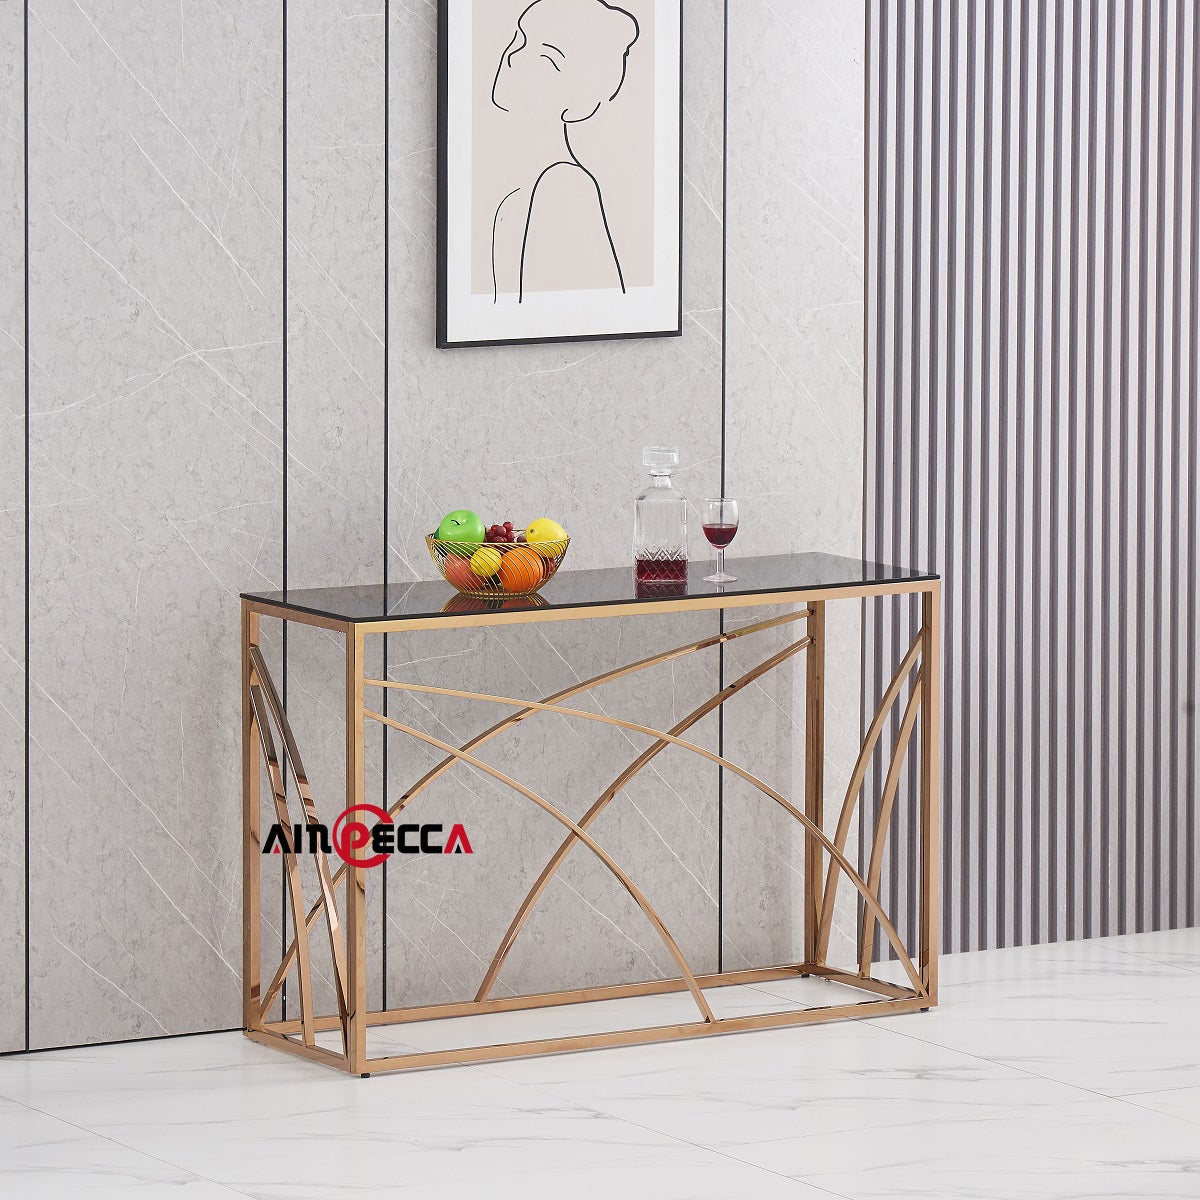 AINPECCA 1 X Console Table Rose Golden Stainless Steel Base Grey Tempered Glass Top For Livingroom Room Foyer Cafe office